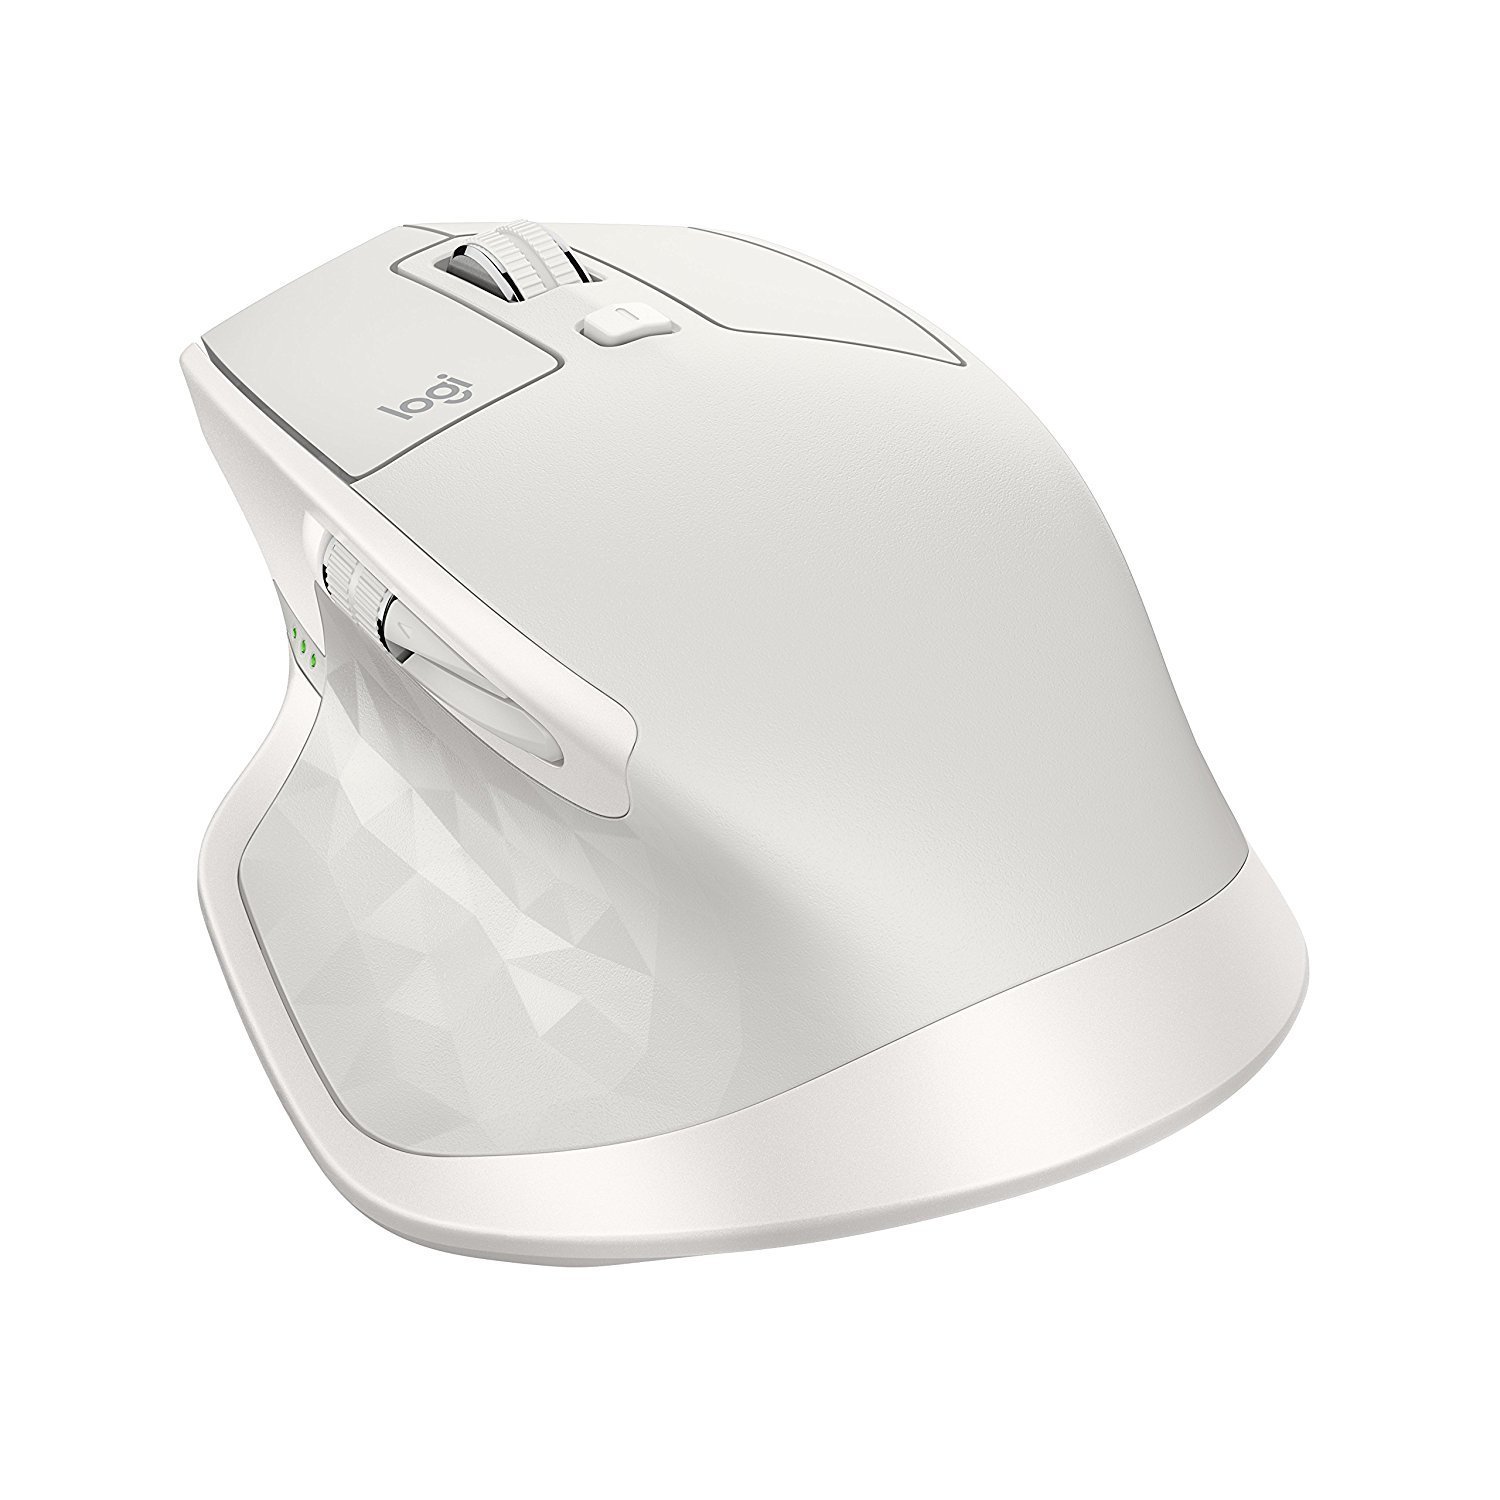 what is the best mouse for macbook pro